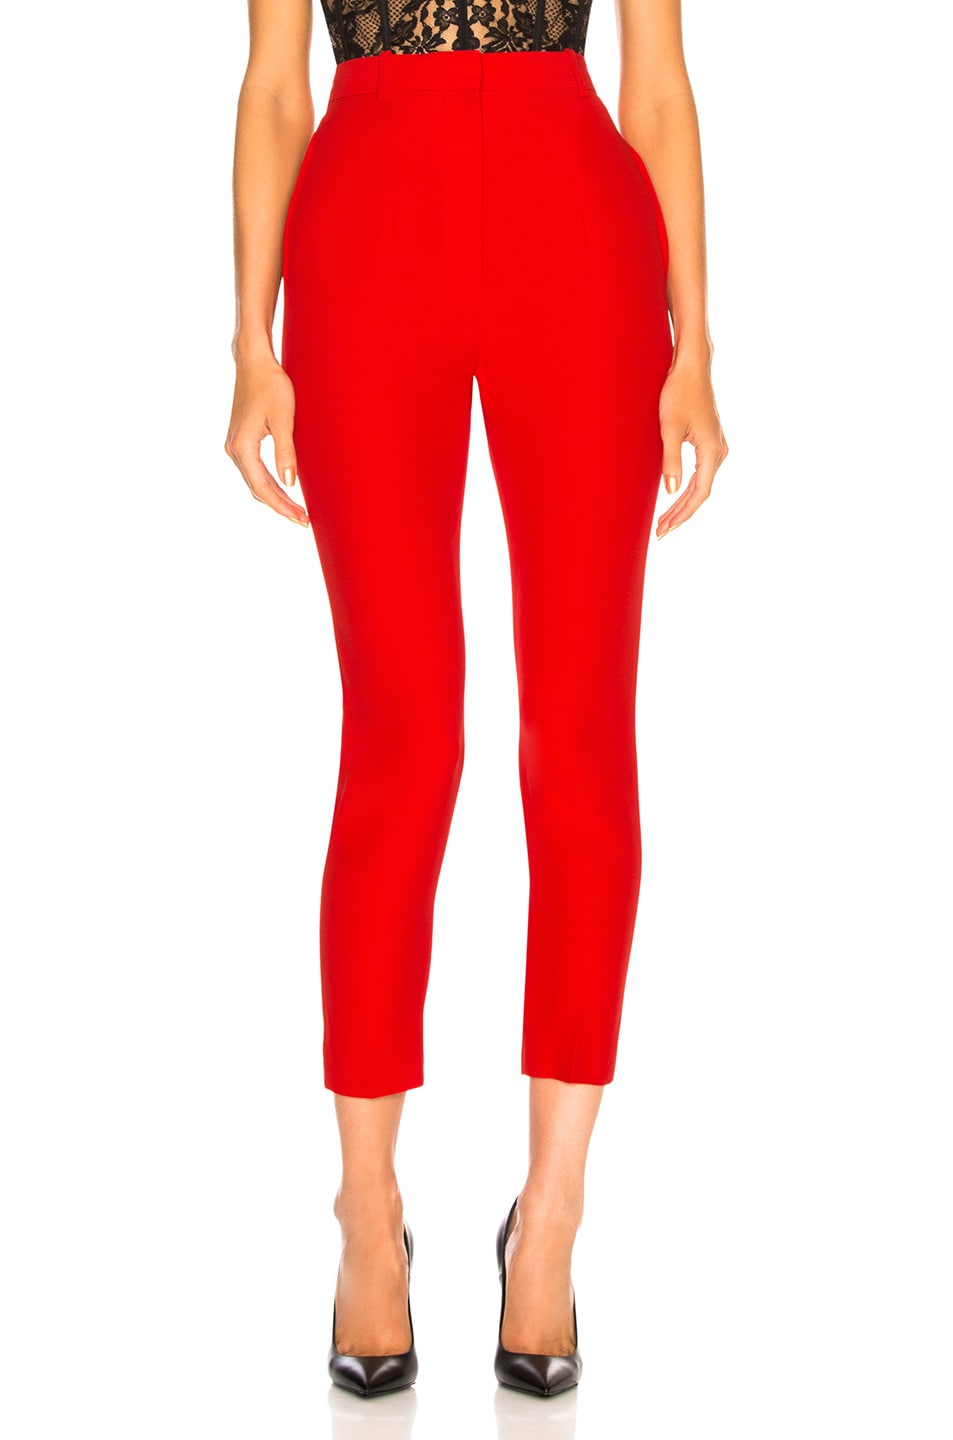 Alexander McQueen High Waisted Cigarette Trousers in Lust Red | FWRD